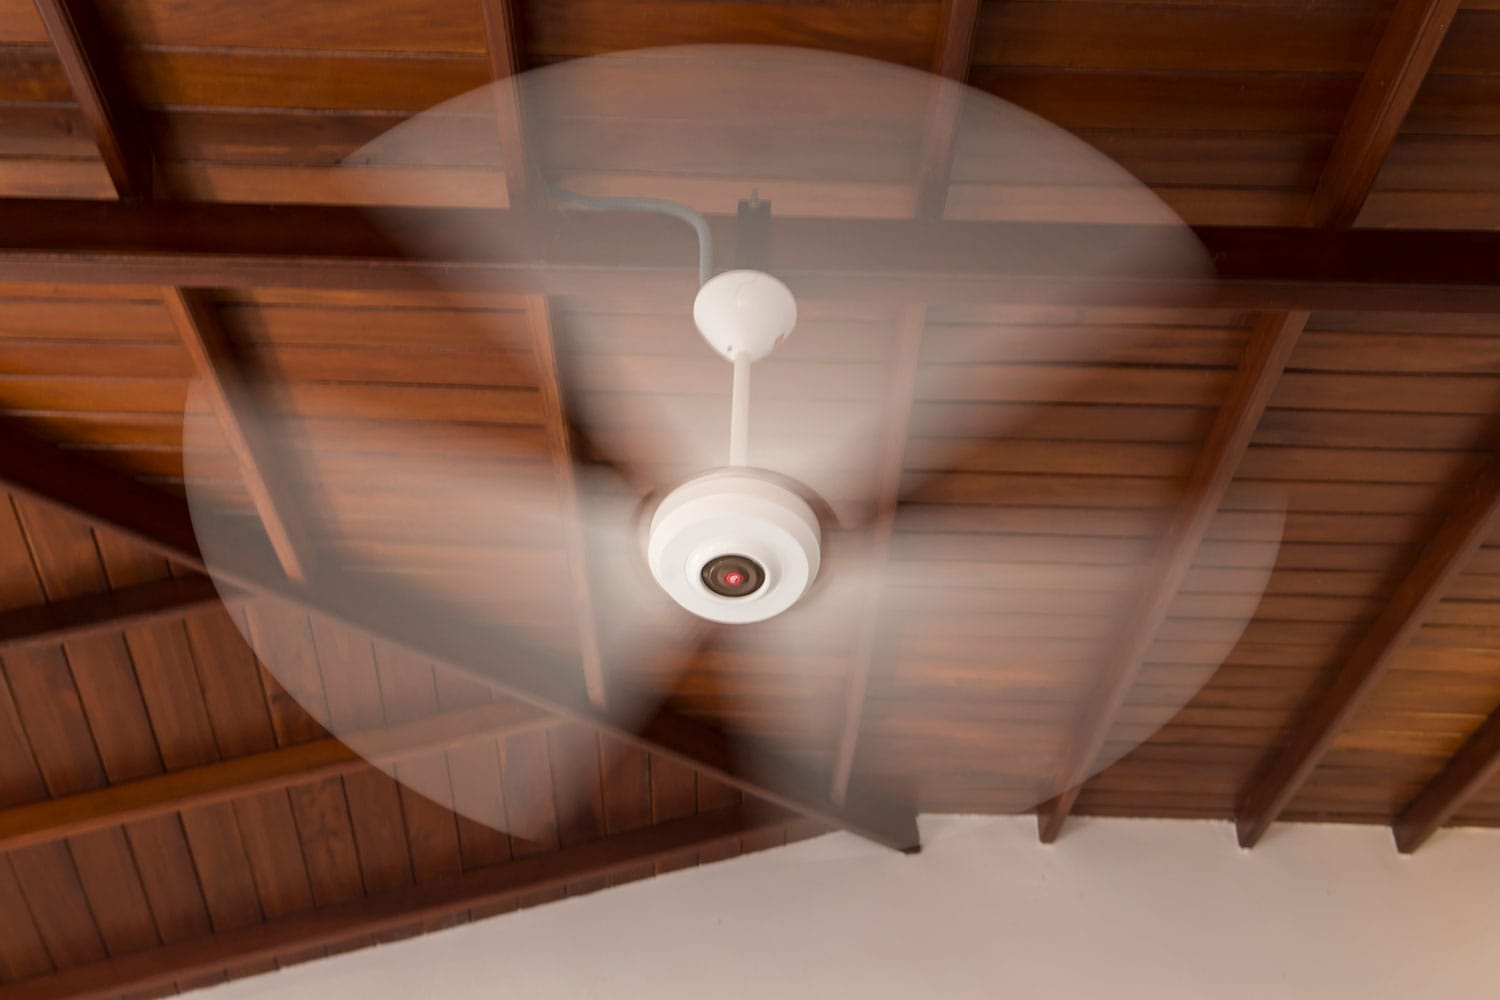 A white spinning electric fan inside a rustic wooden room